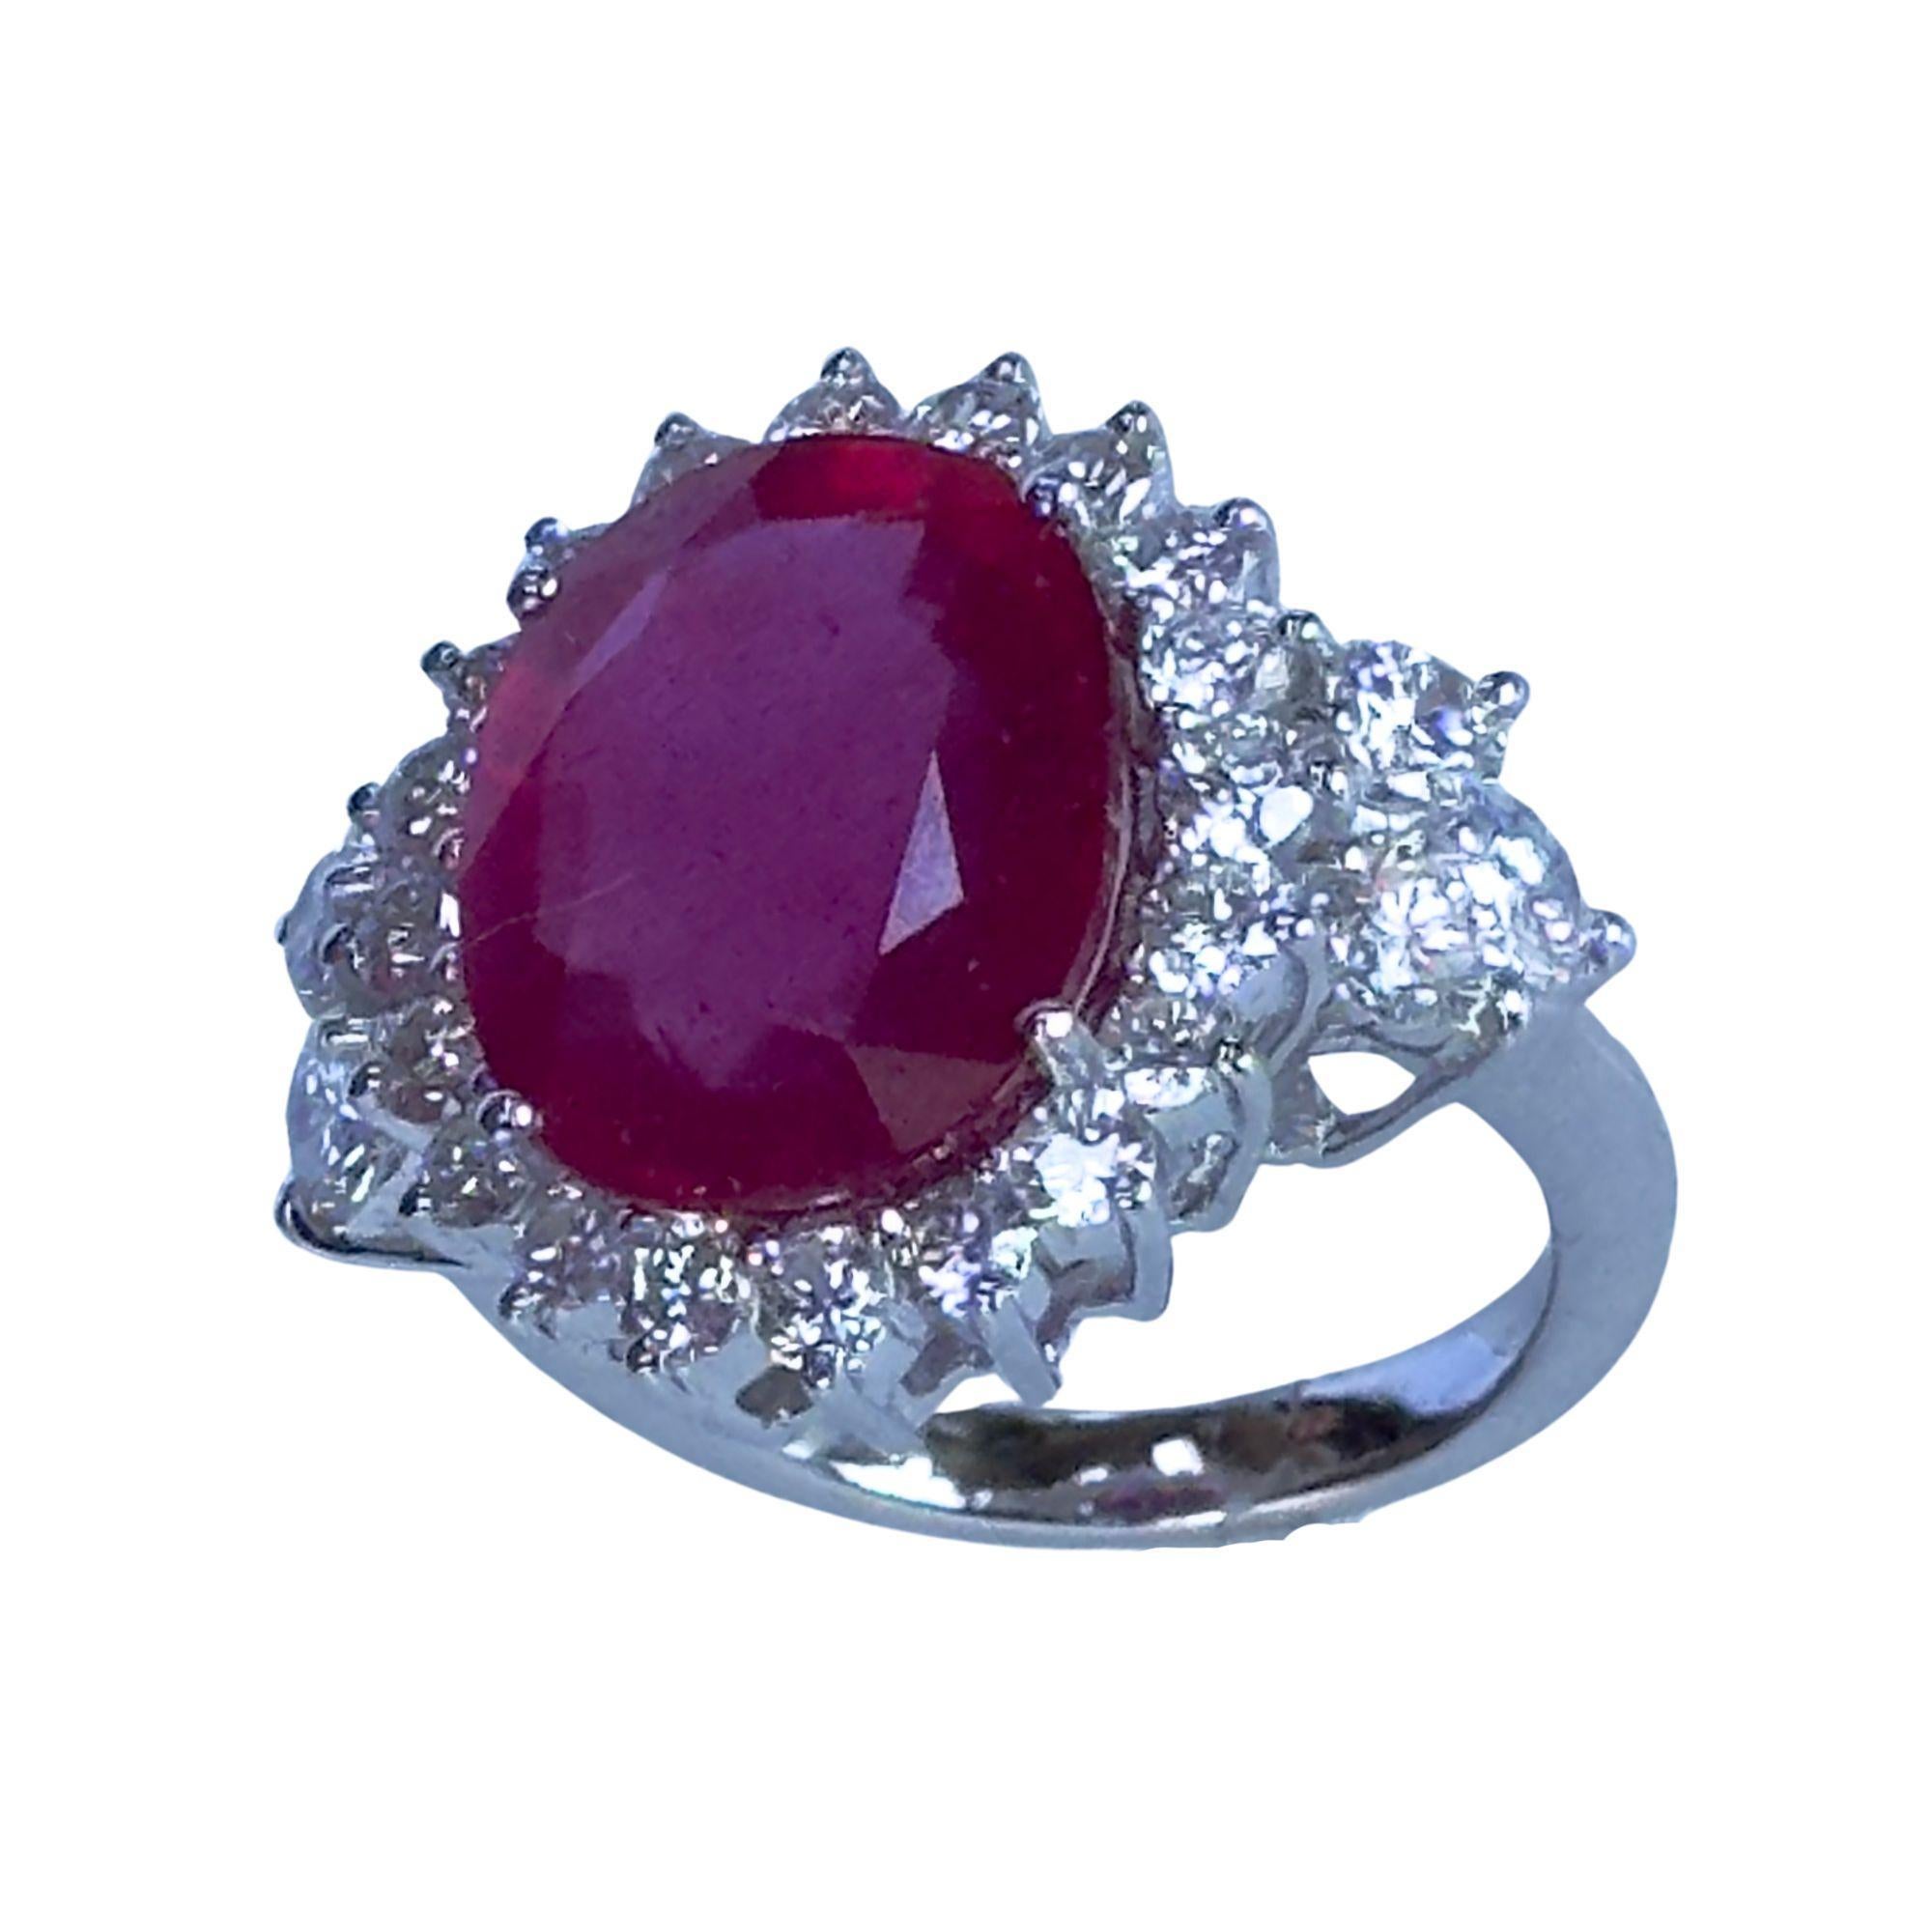 This stunning 18k diamond and ruby ring features a total of 2.66 carats of diamonds and a beautiful 10.14 carat ruby center, all set in 18k white gold. With its elegant design, solid weight of 8.65 grams, and ring size of 6.75, it is the perfect